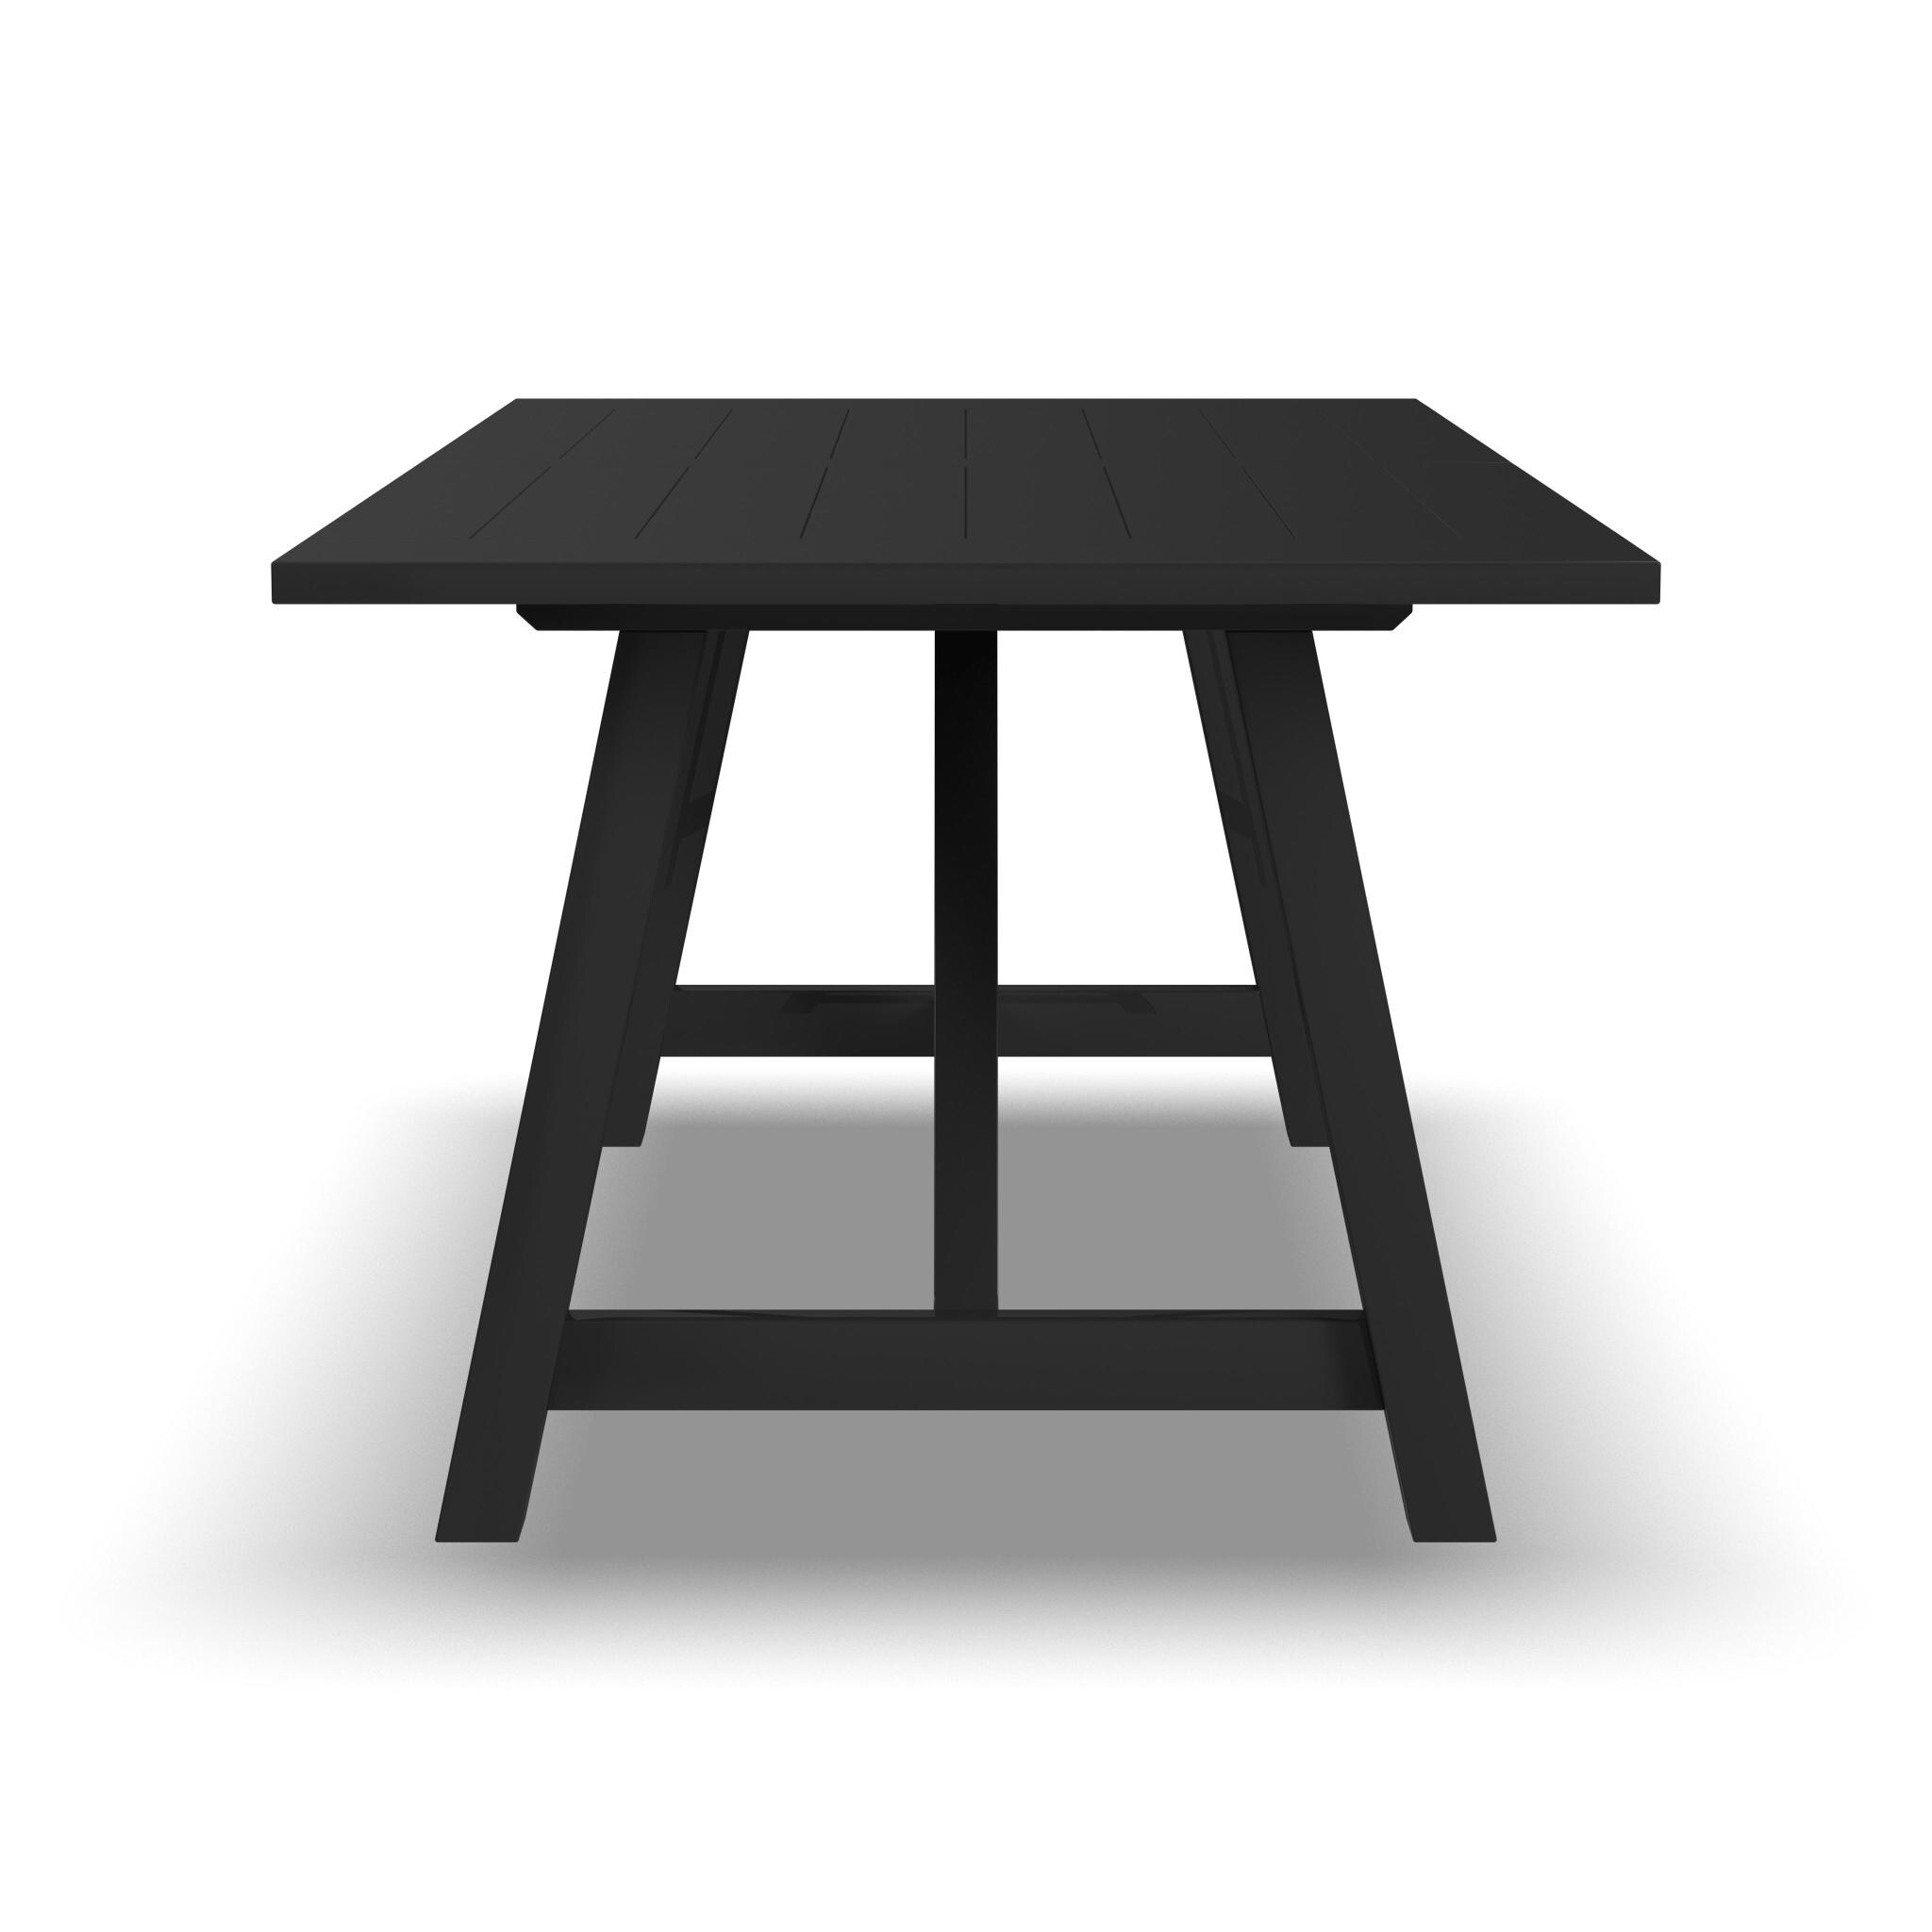 https://ak1.ostkcdn.com/images/products/is/images/direct/11f619d8aeb3f2299c2e6a208622cd0d9b8218d5/Trestle-Black-Wood-Dining-Table.jpg